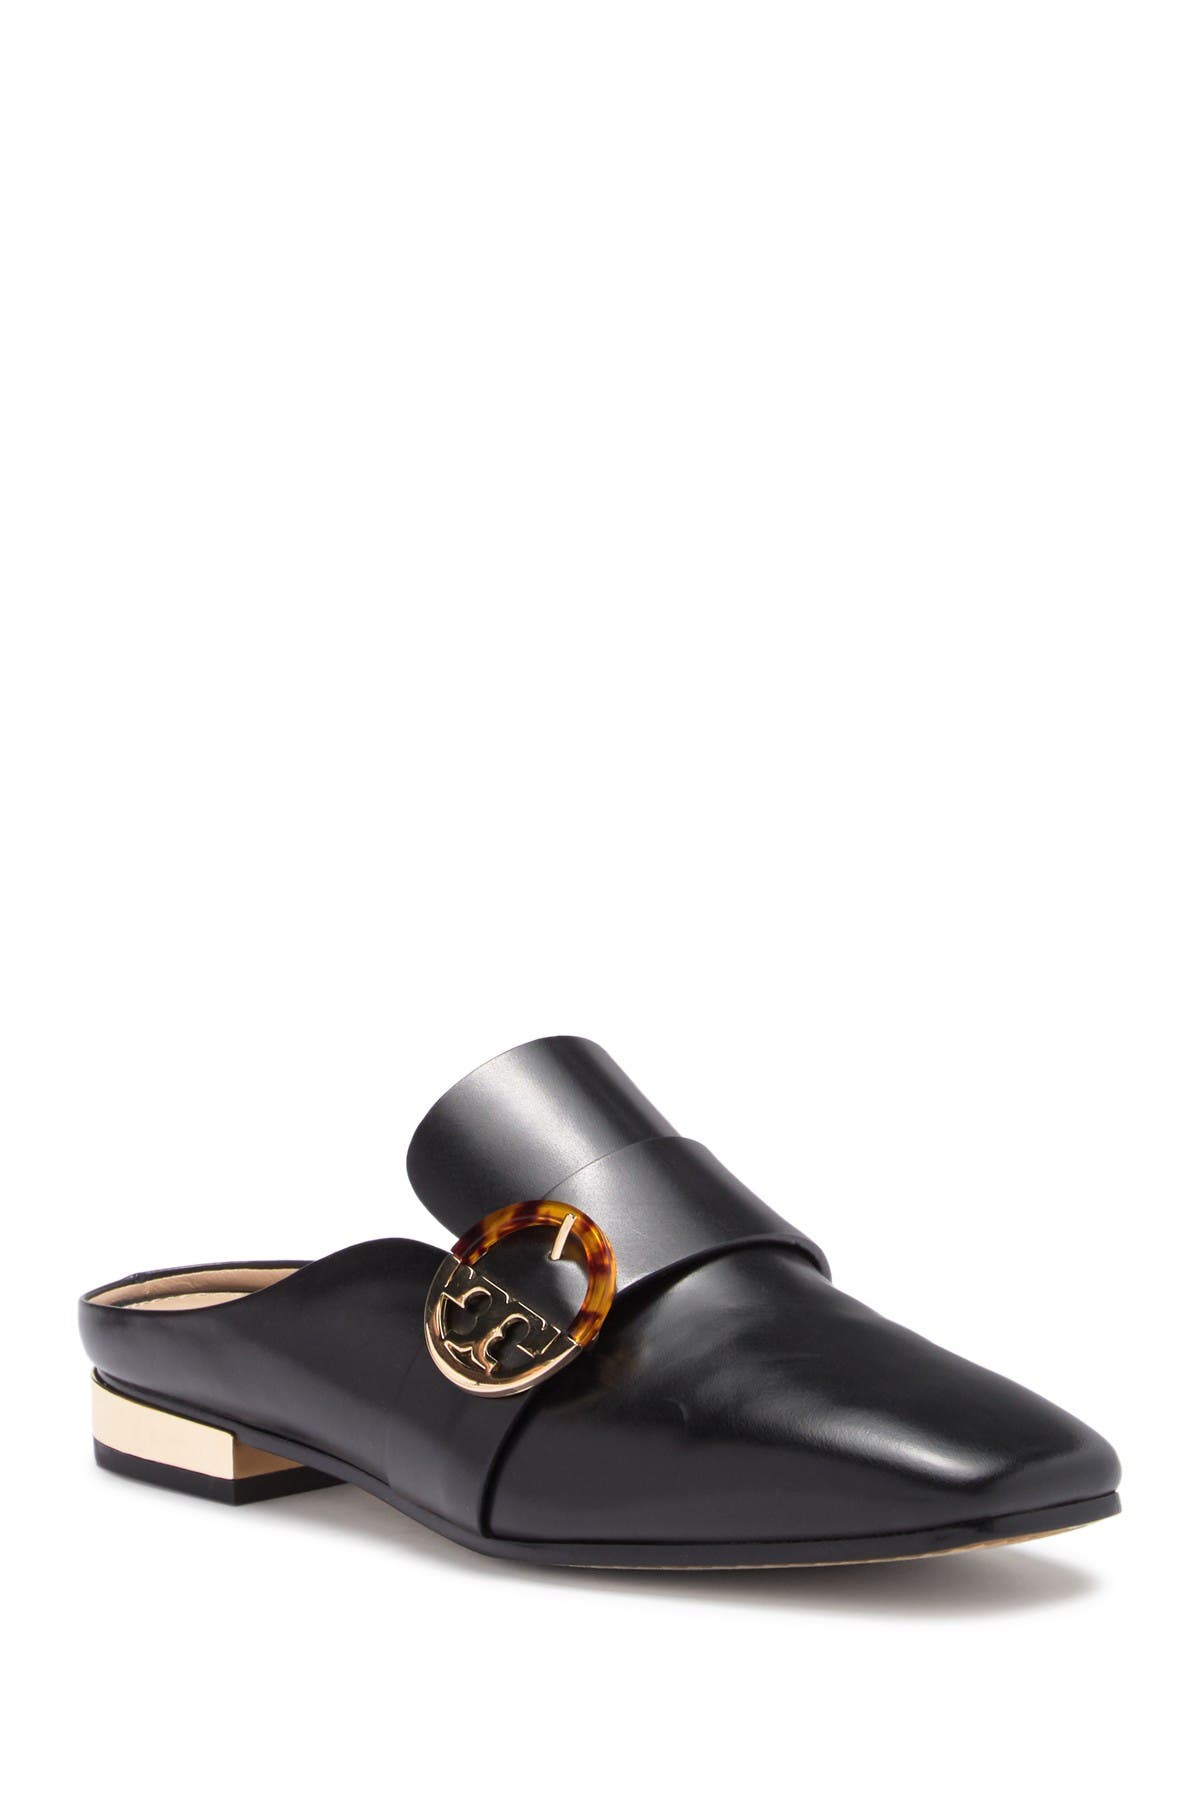 Tory Burch | Sidney Backless Loafer 